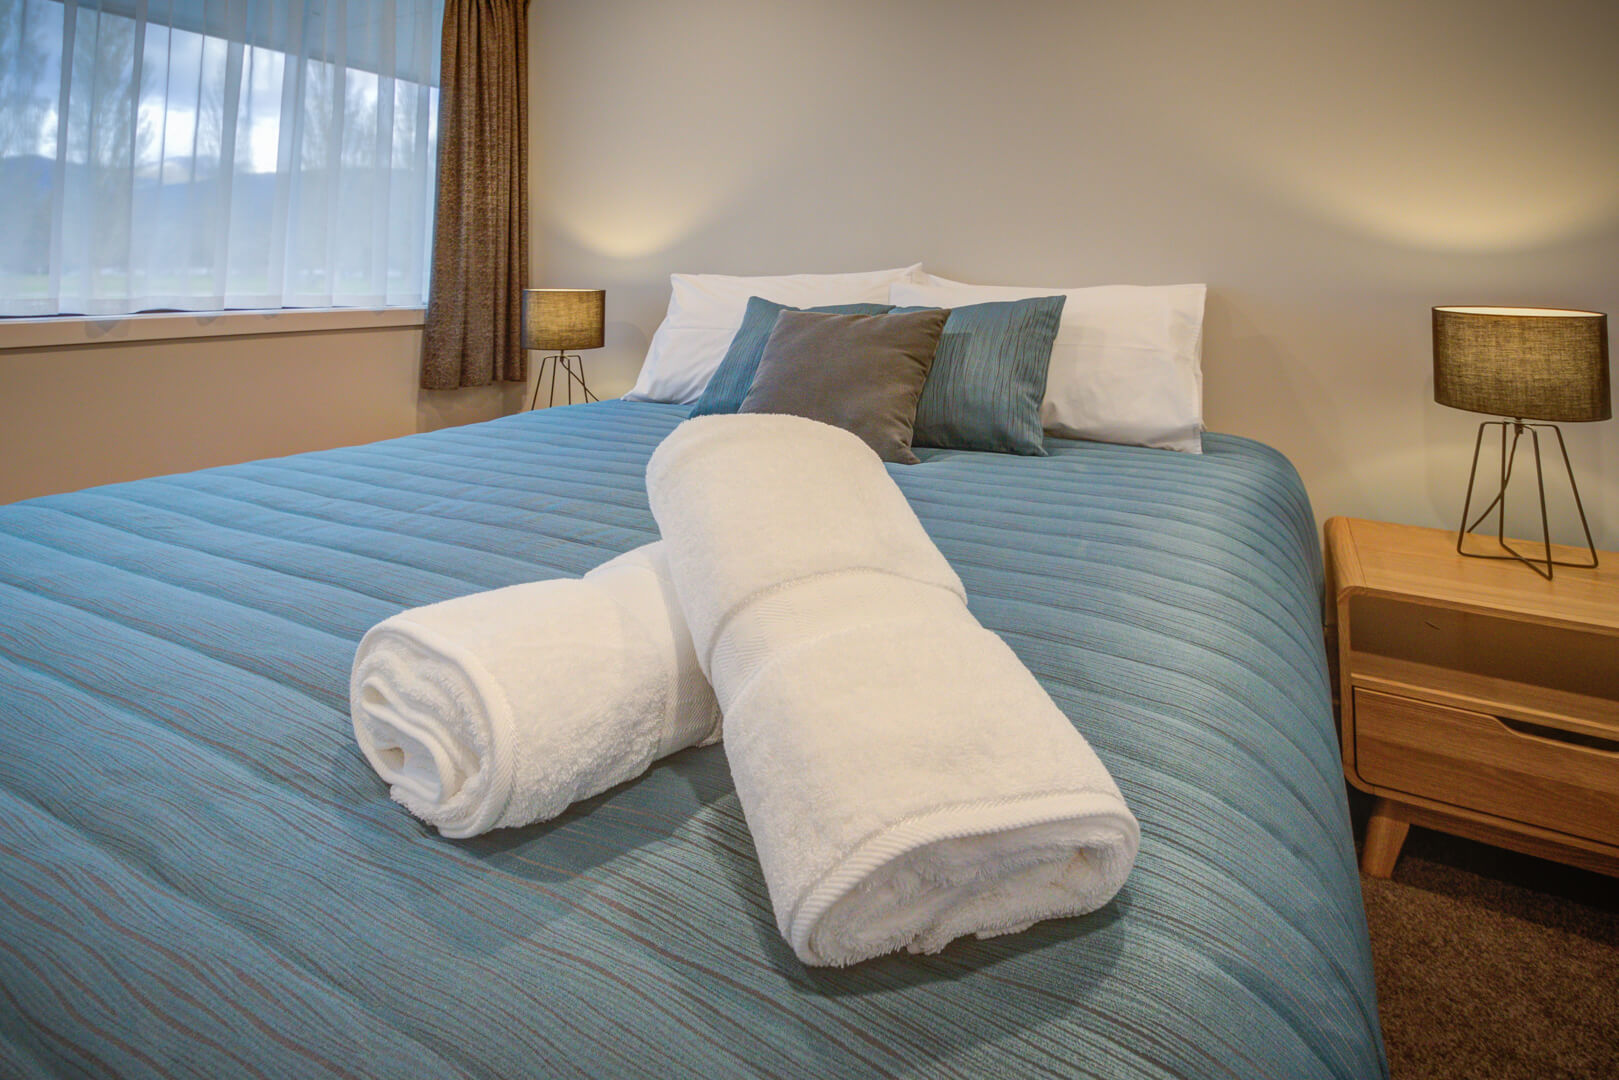 King sized bed with blue bed covers flanked by bedside tables and lamps atop.